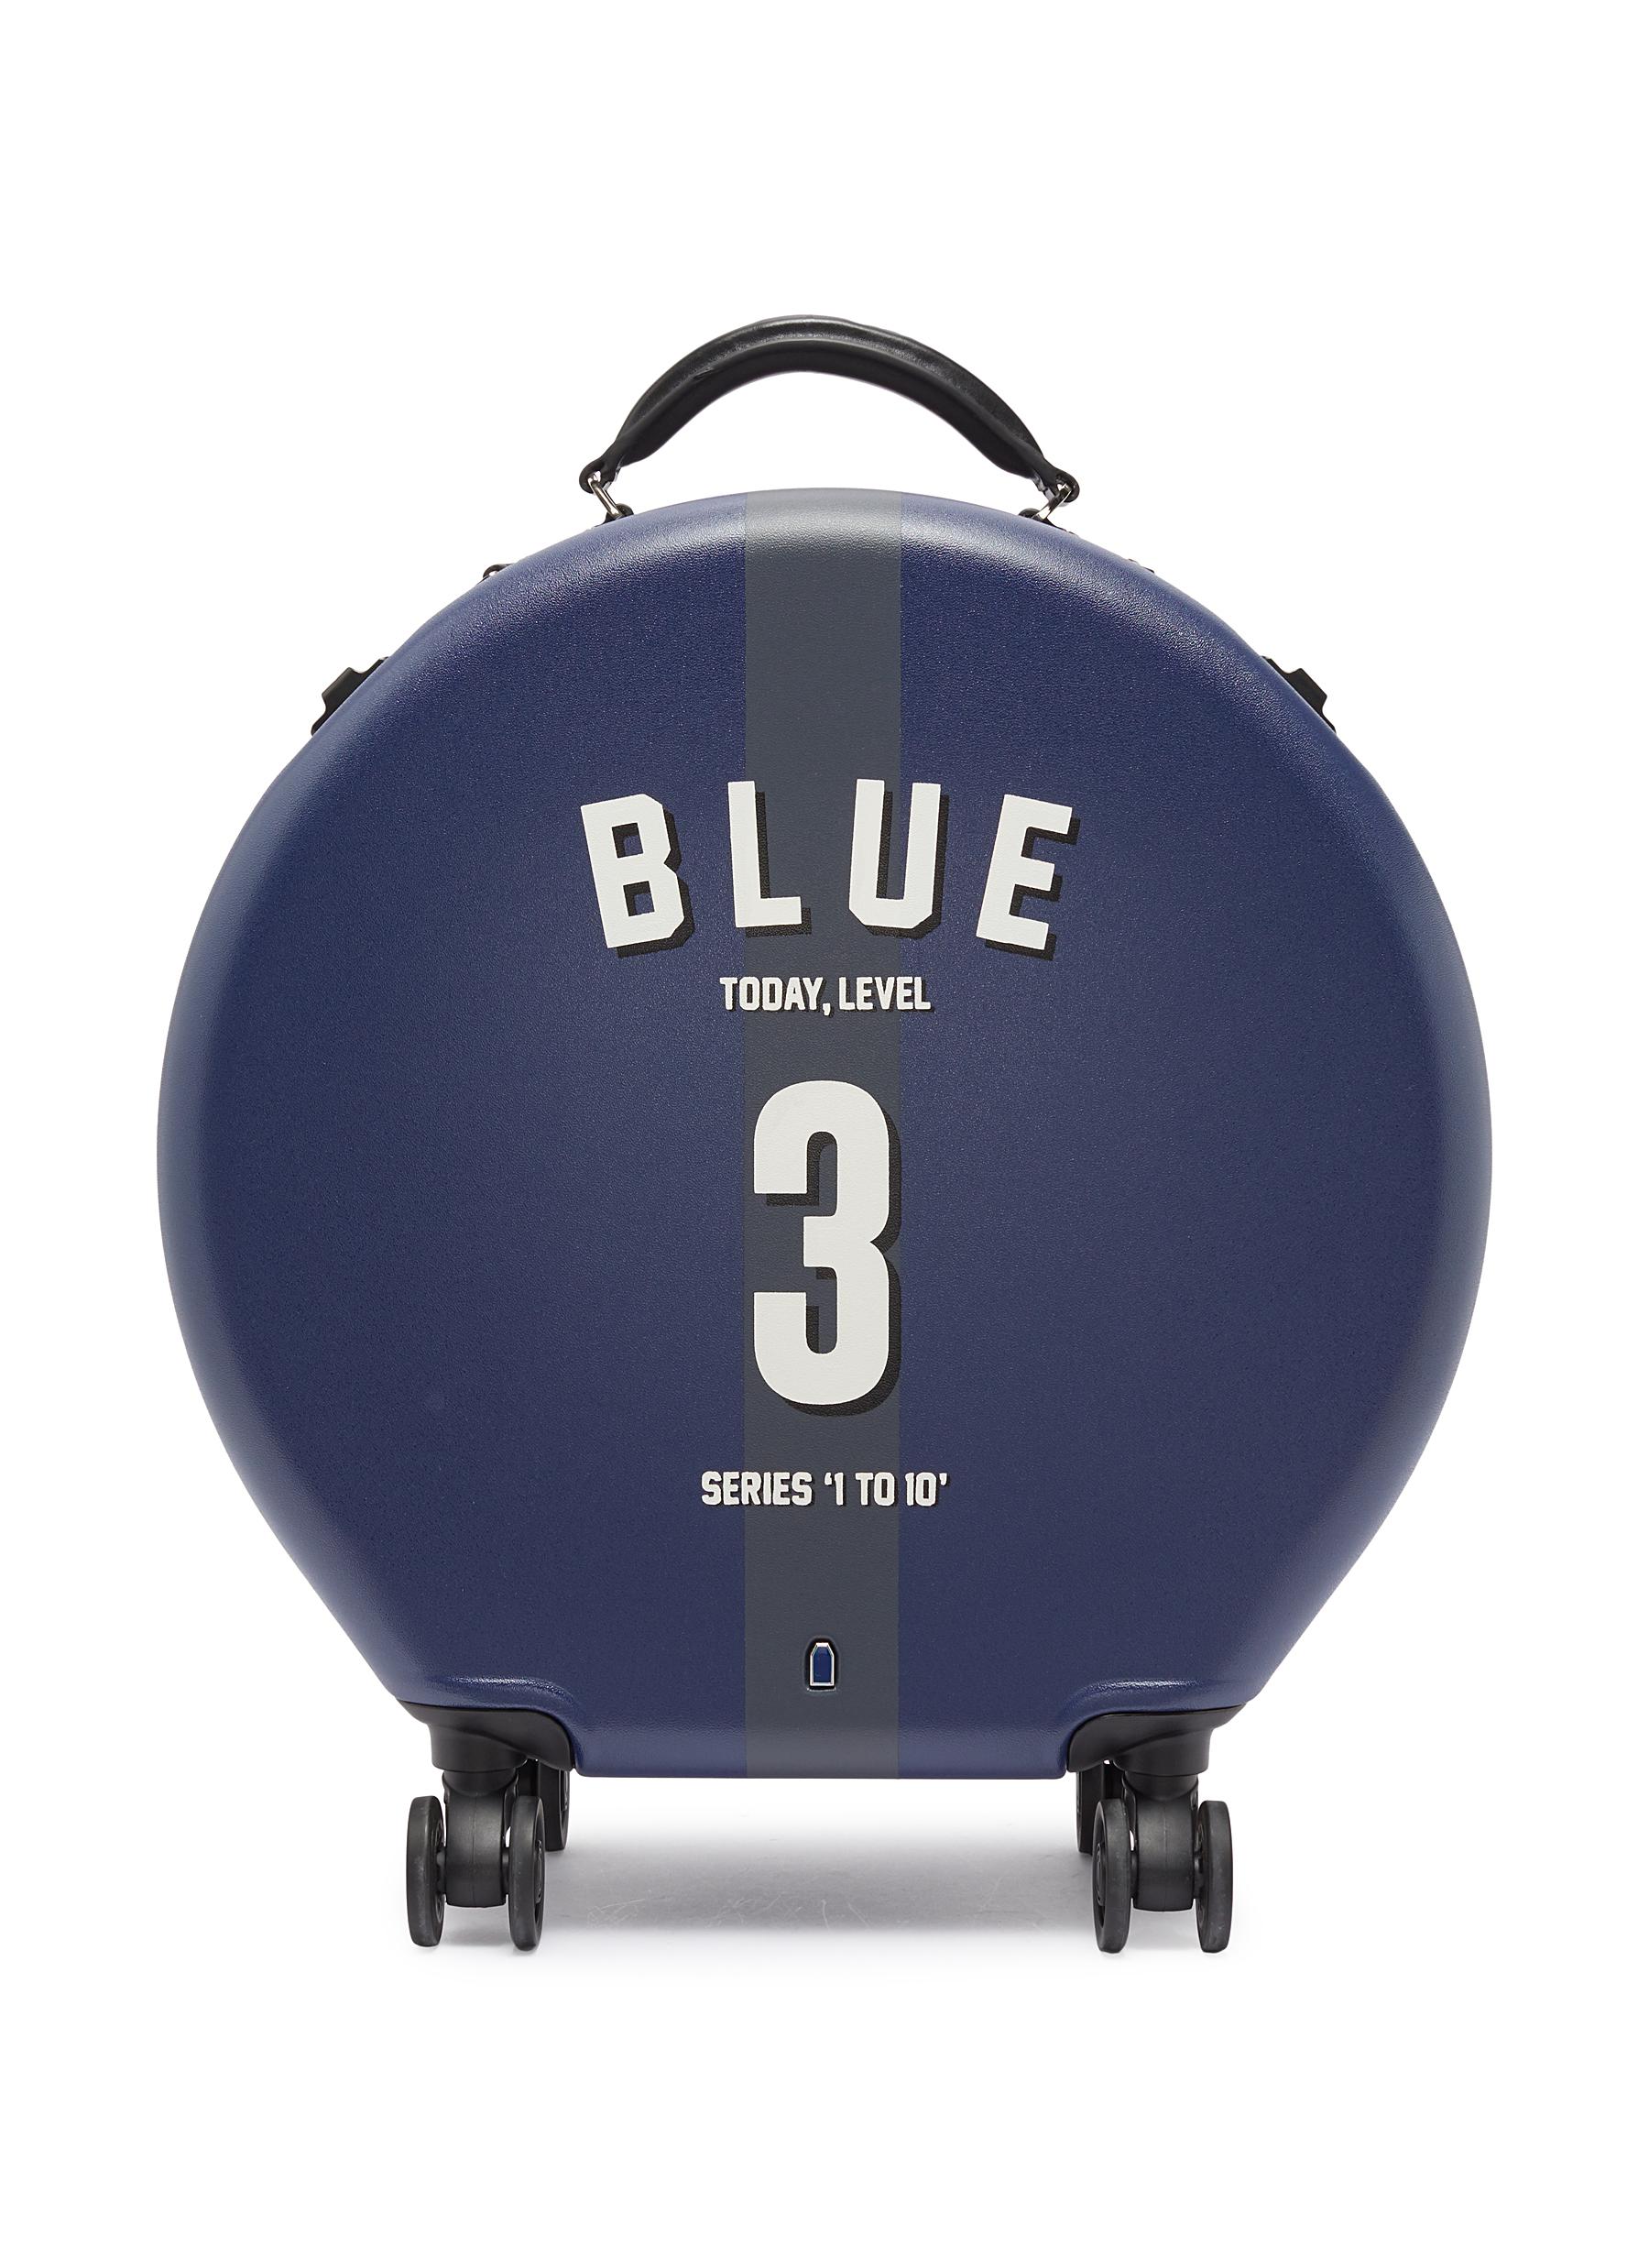 x Studio Concrete round carry-on spinner suitcase - 3 Blue